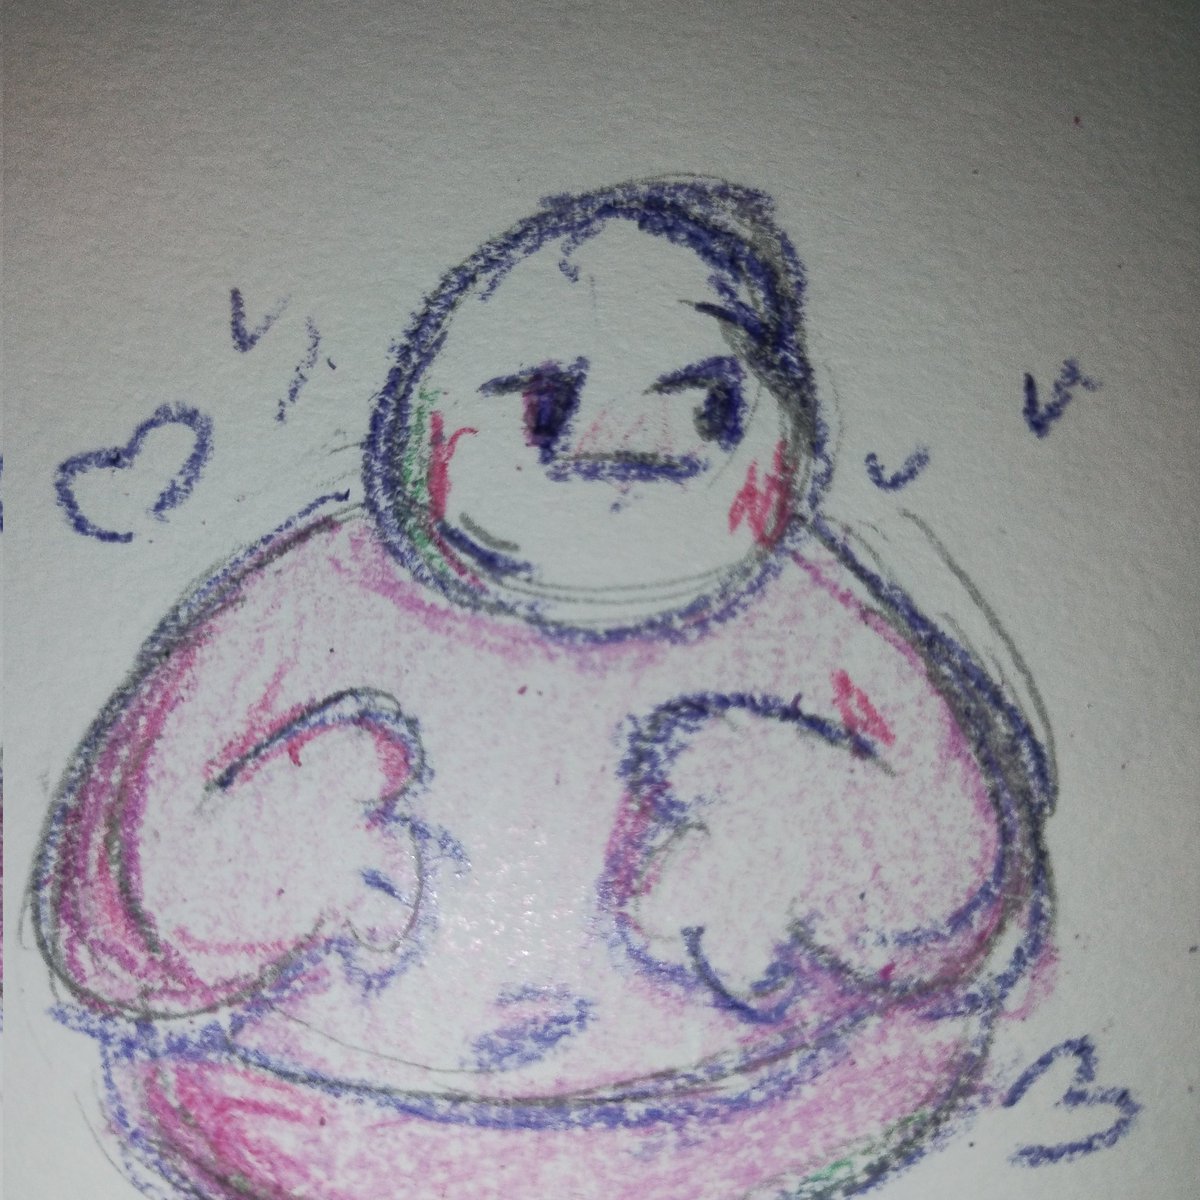 test drawinf i thought was kinda cute before ruining it by forgetting crayons actually smudge a lot when they erase